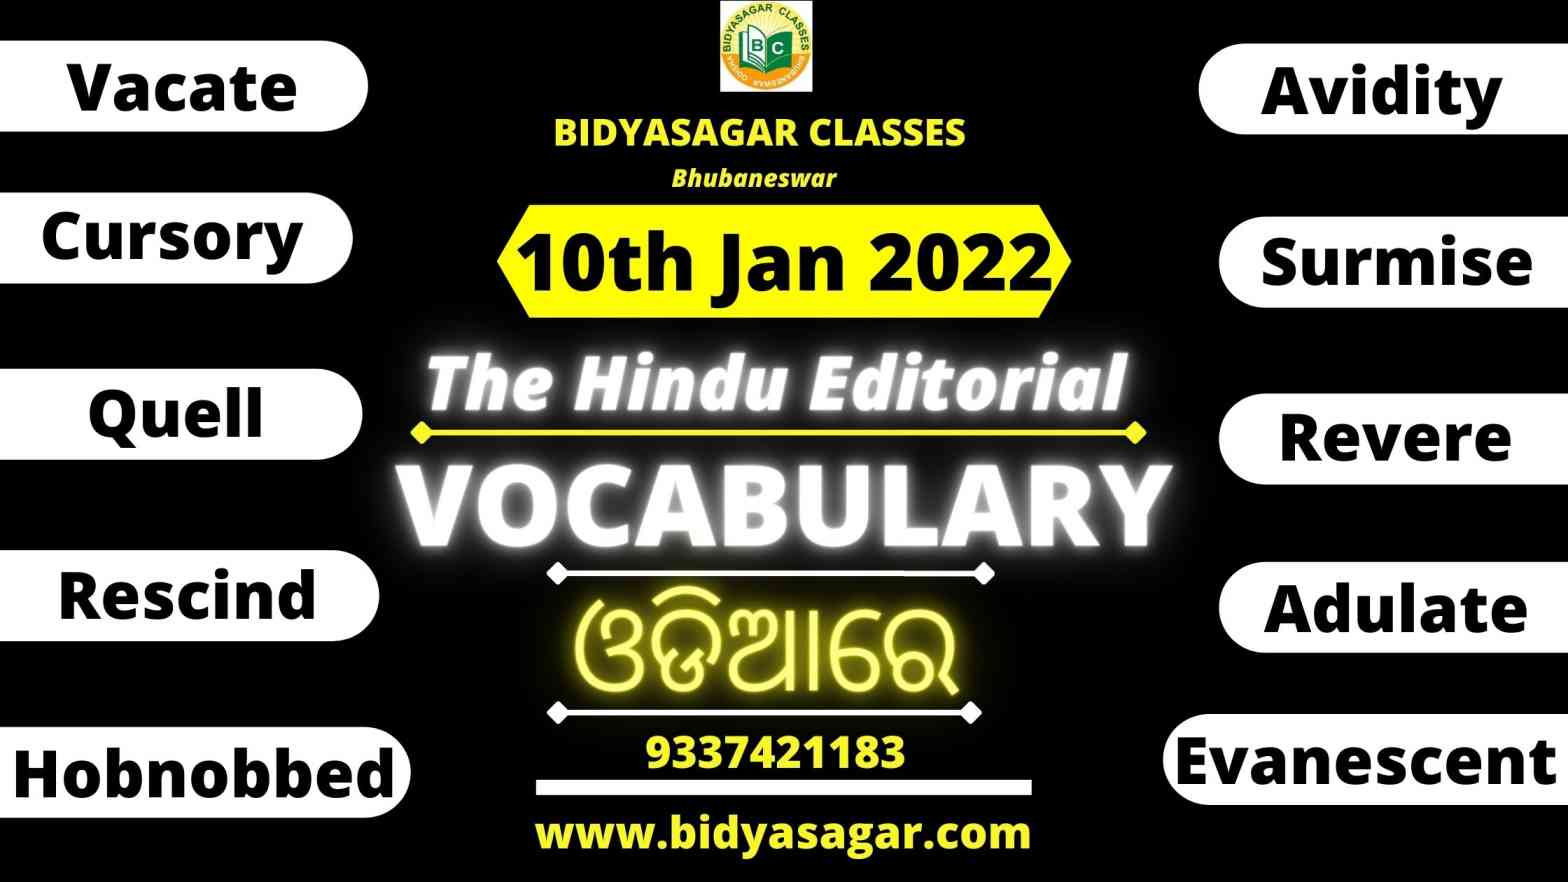 The Hindu Editorial Vocabulary of 10th January 2022